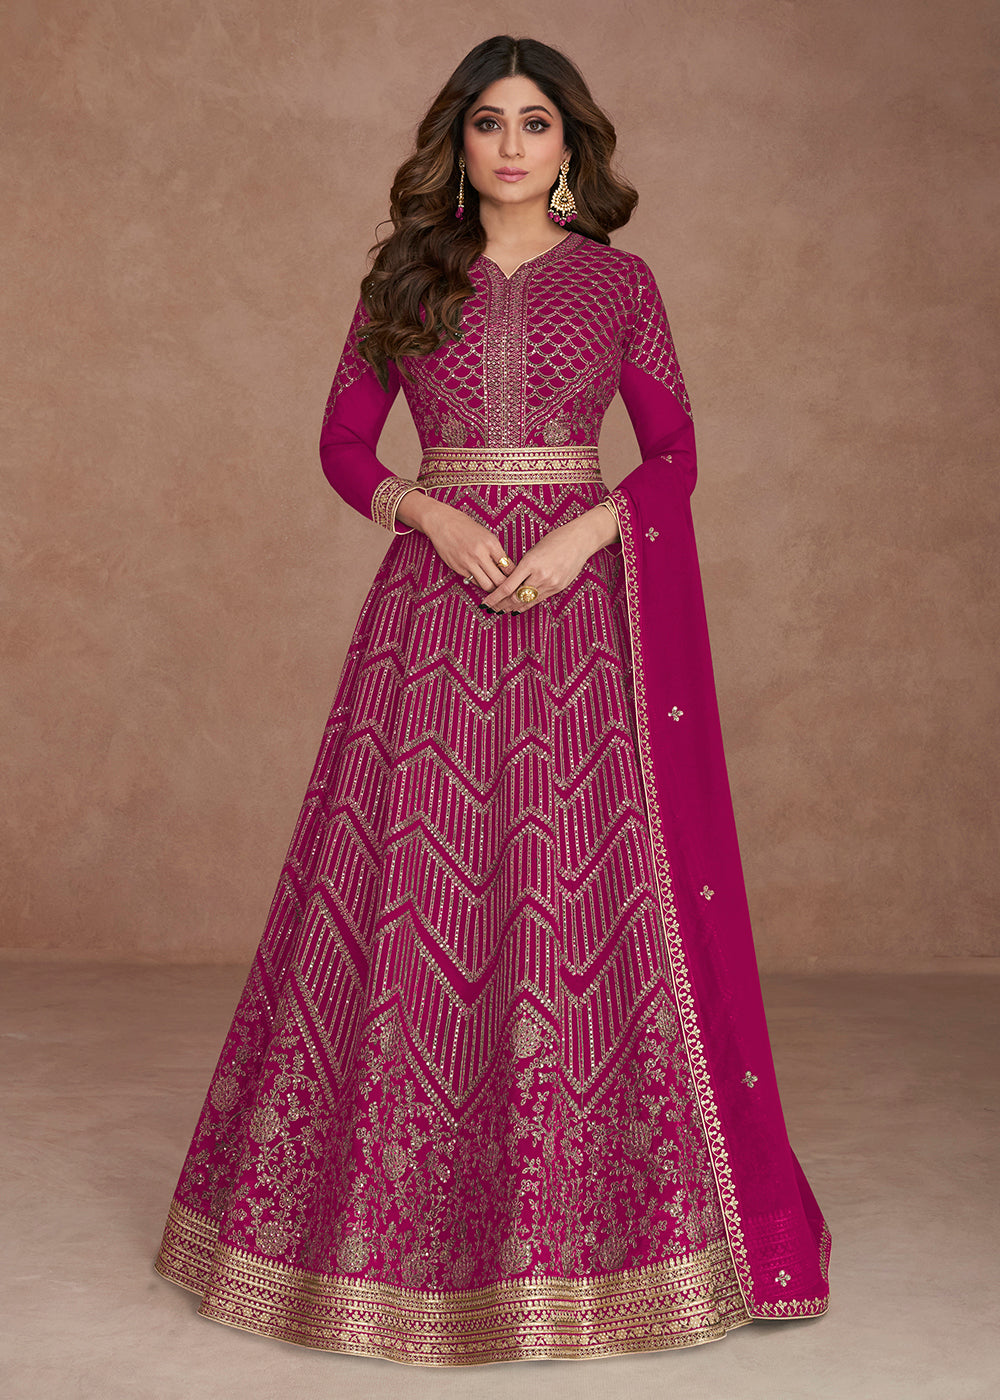 Buy Now Sequined Embroidered Hot Pink Shamita Shetty Anarkali Gown Online in USA, UK, Australia, New Zealand, Canada, Italy & Worldwide at Empress Clothing.